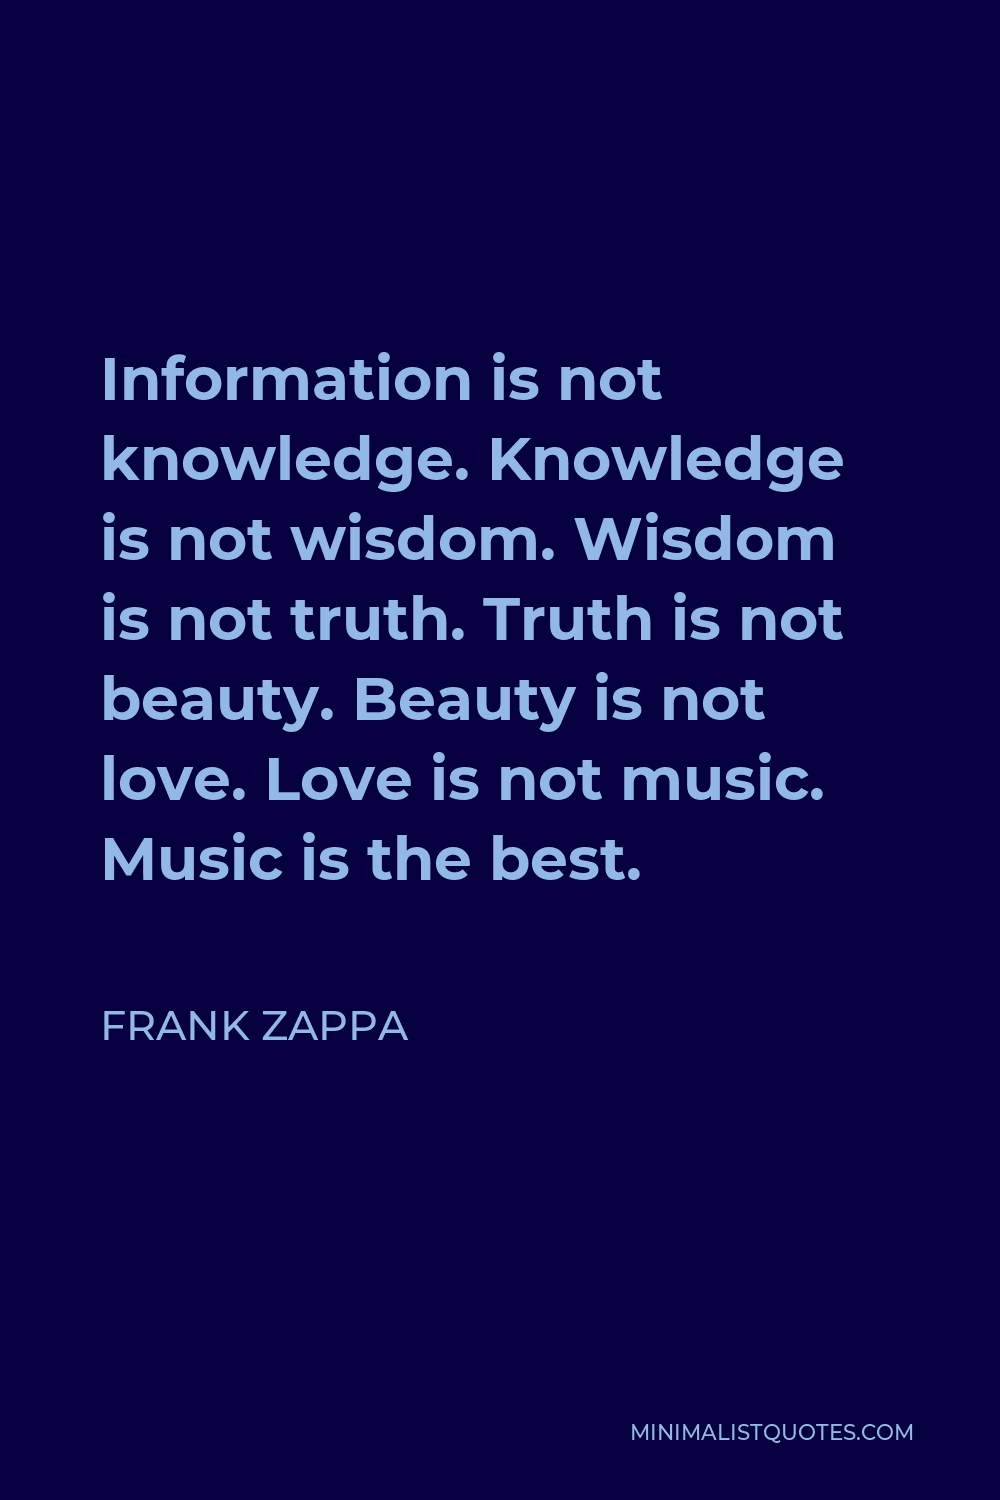 Frank Zappa Quote - Information is not knowledge. Knowledge is not wisdom. Wisdom is not truth. Truth is not beauty. Beauty is not love. Love is not music. Music is the best.